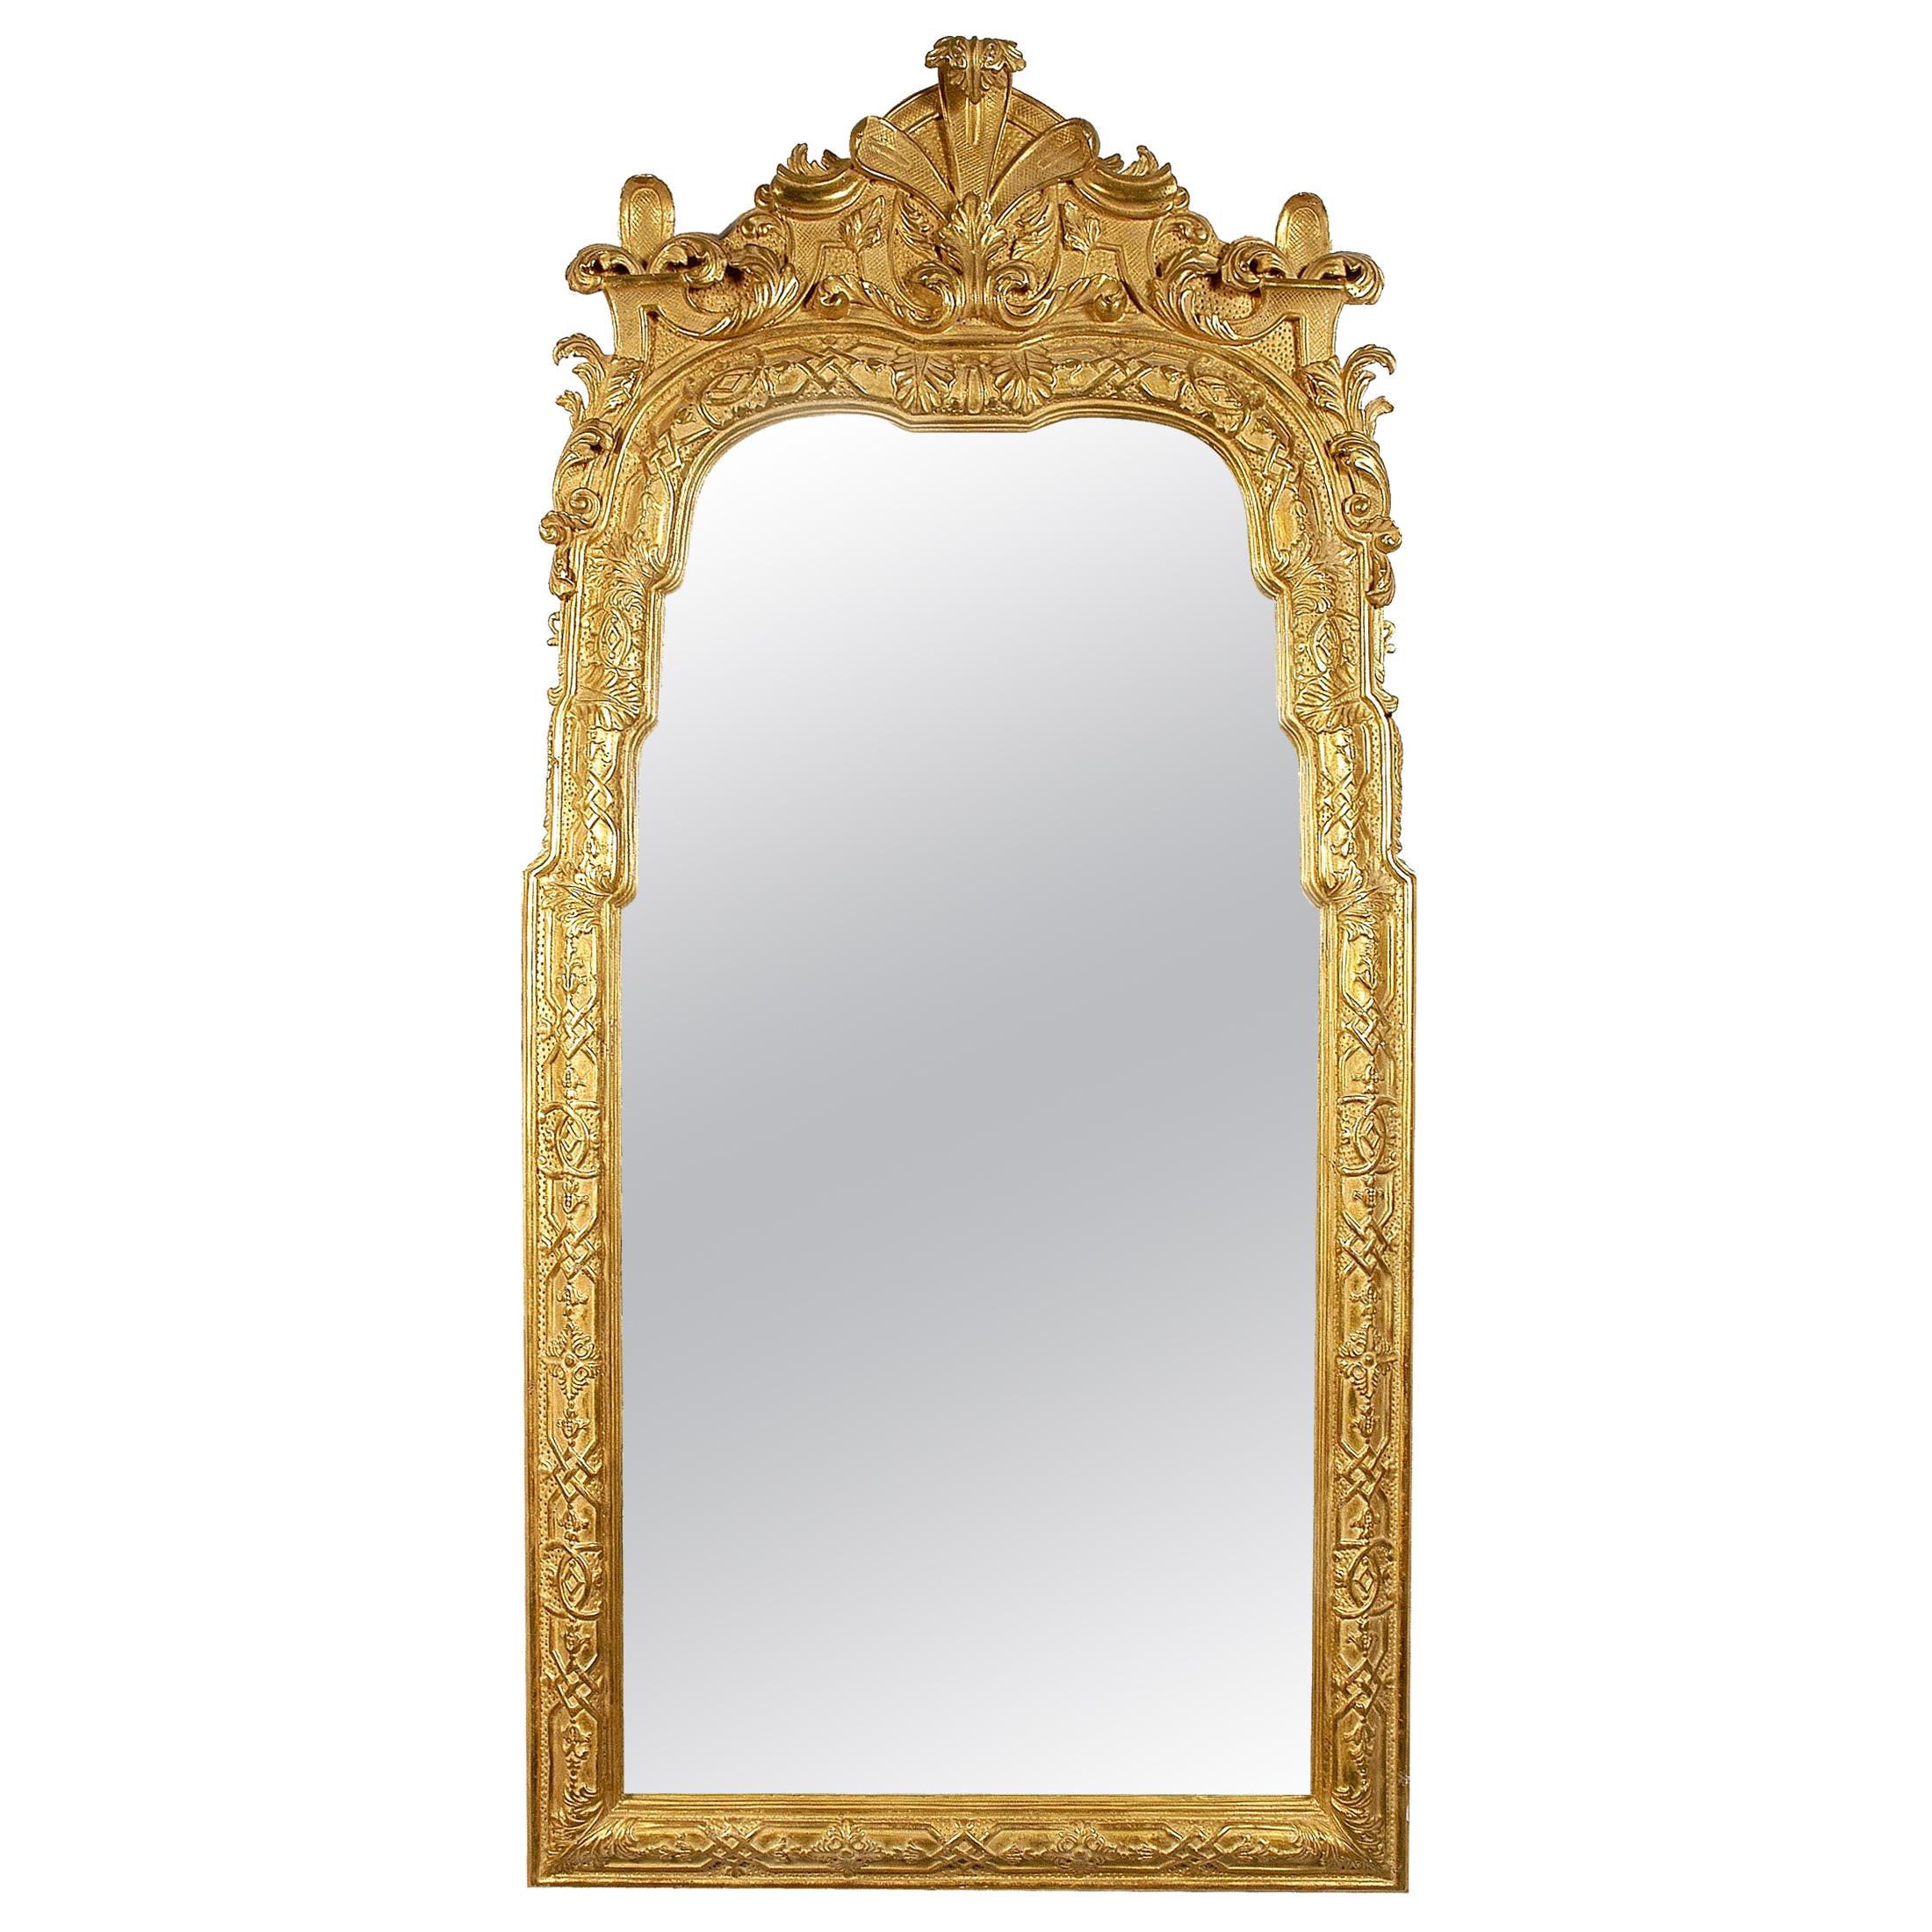 Neoclassical Regency Rectangular Gold Hand Carved Wooden Mirror